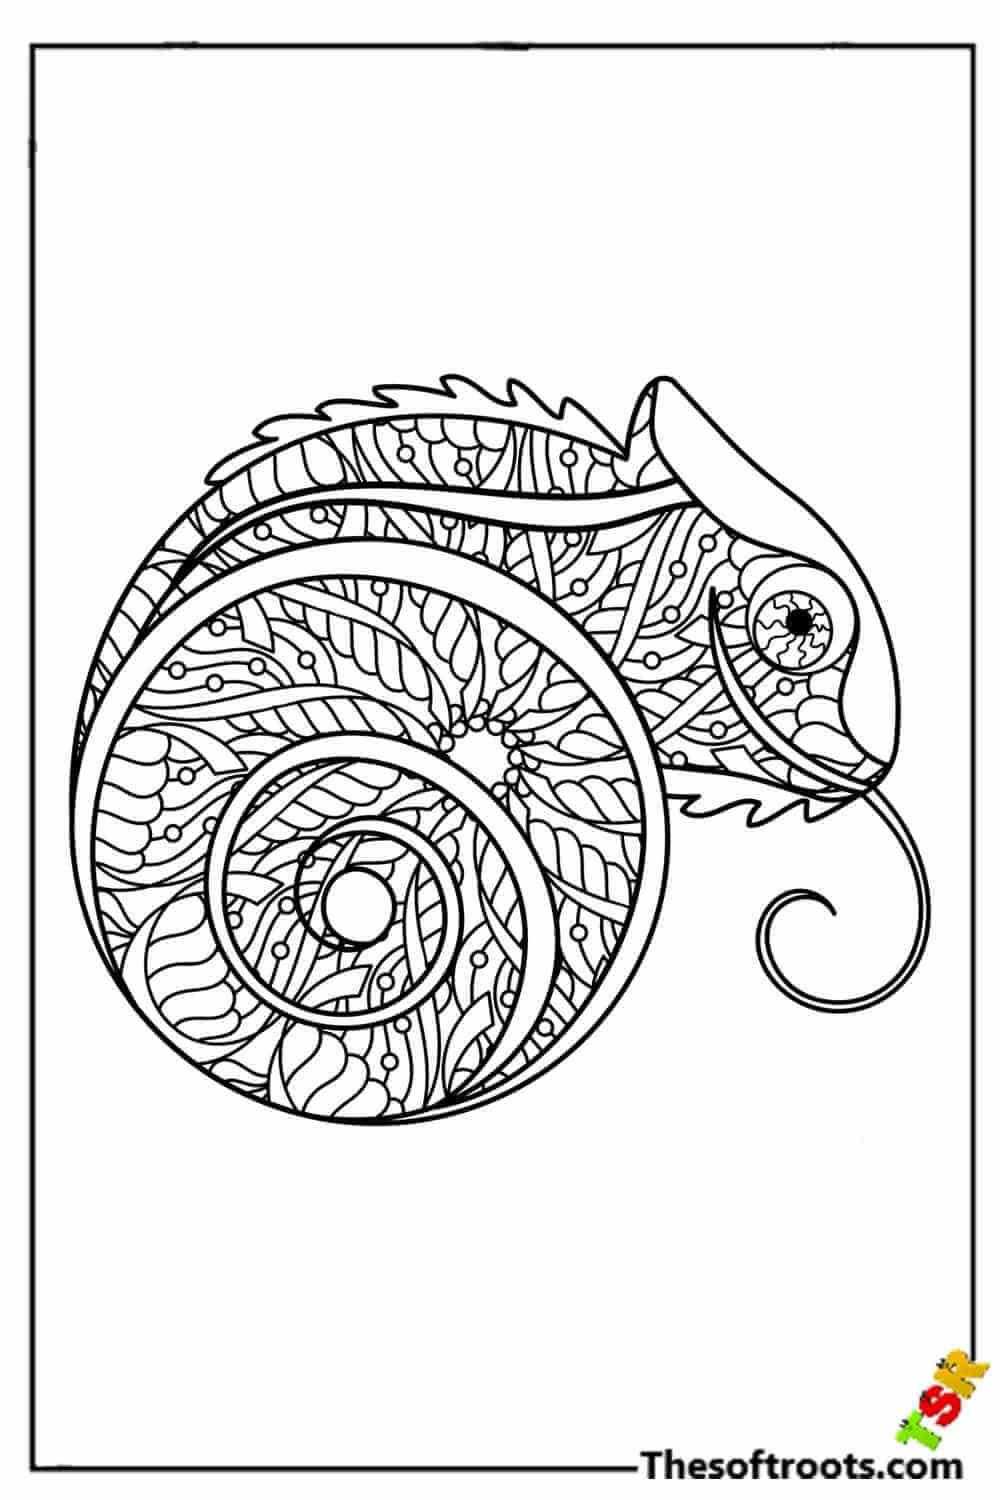 Adult Chameleon coloring pages